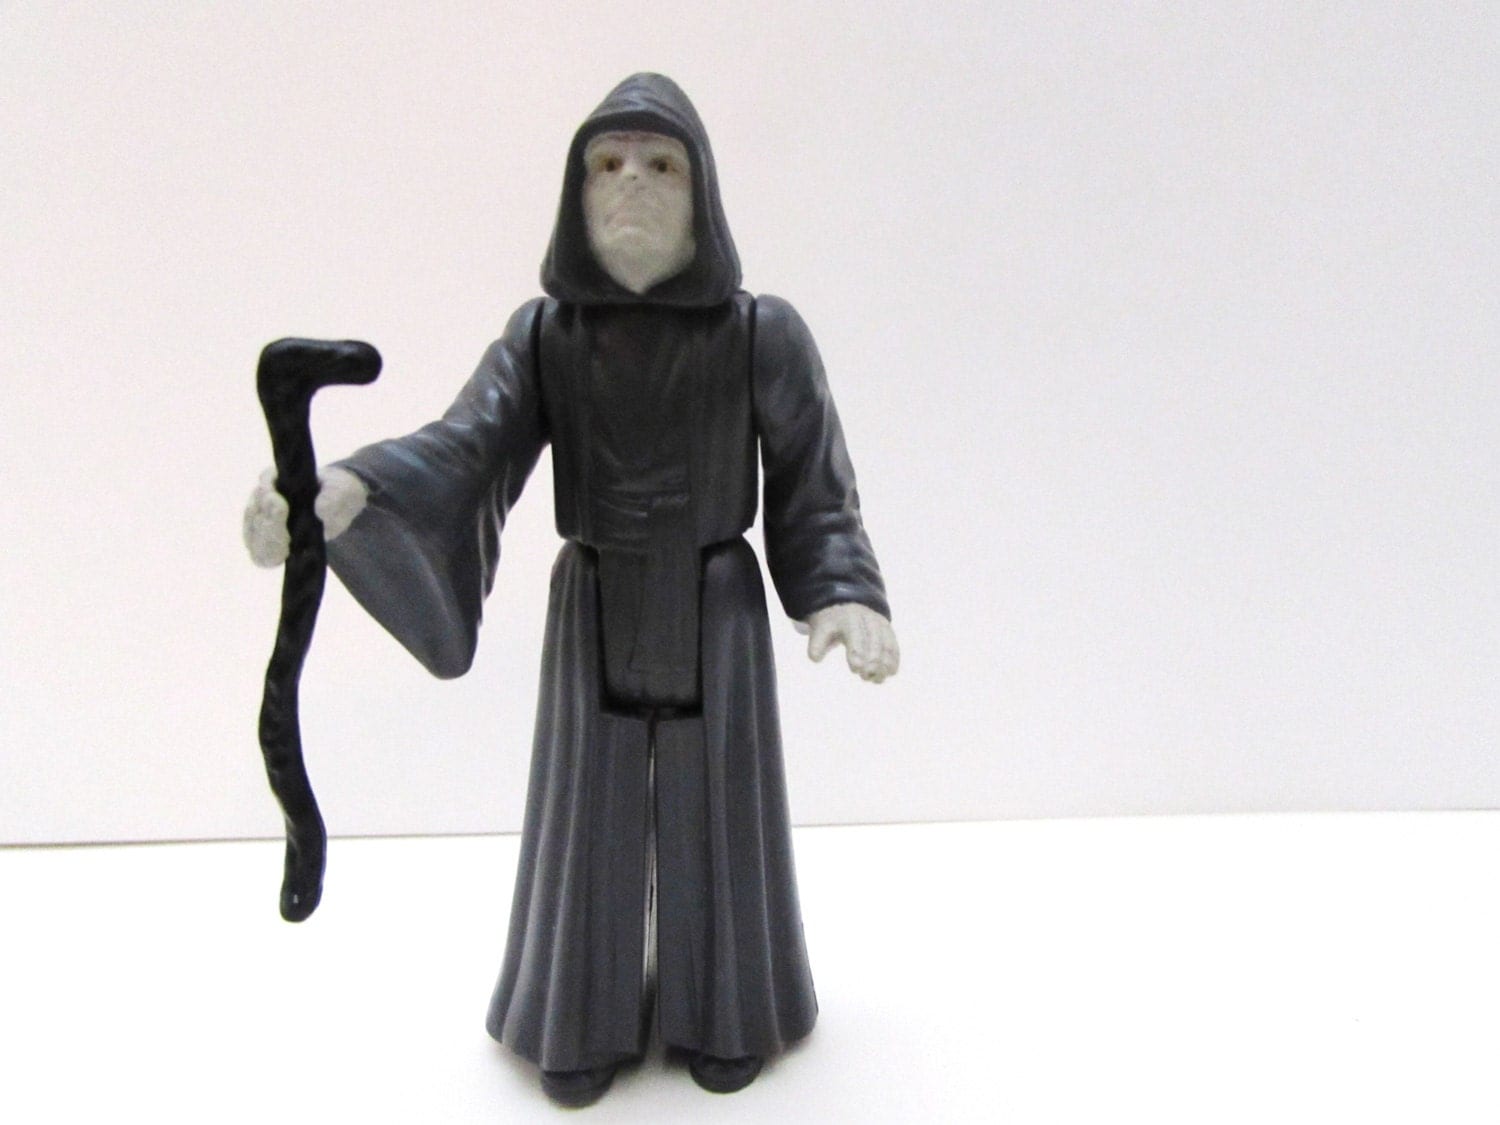 Vintage Star Wars Emperor Palpatine Action Figure - Il Fullxfull.549785569 9yc7